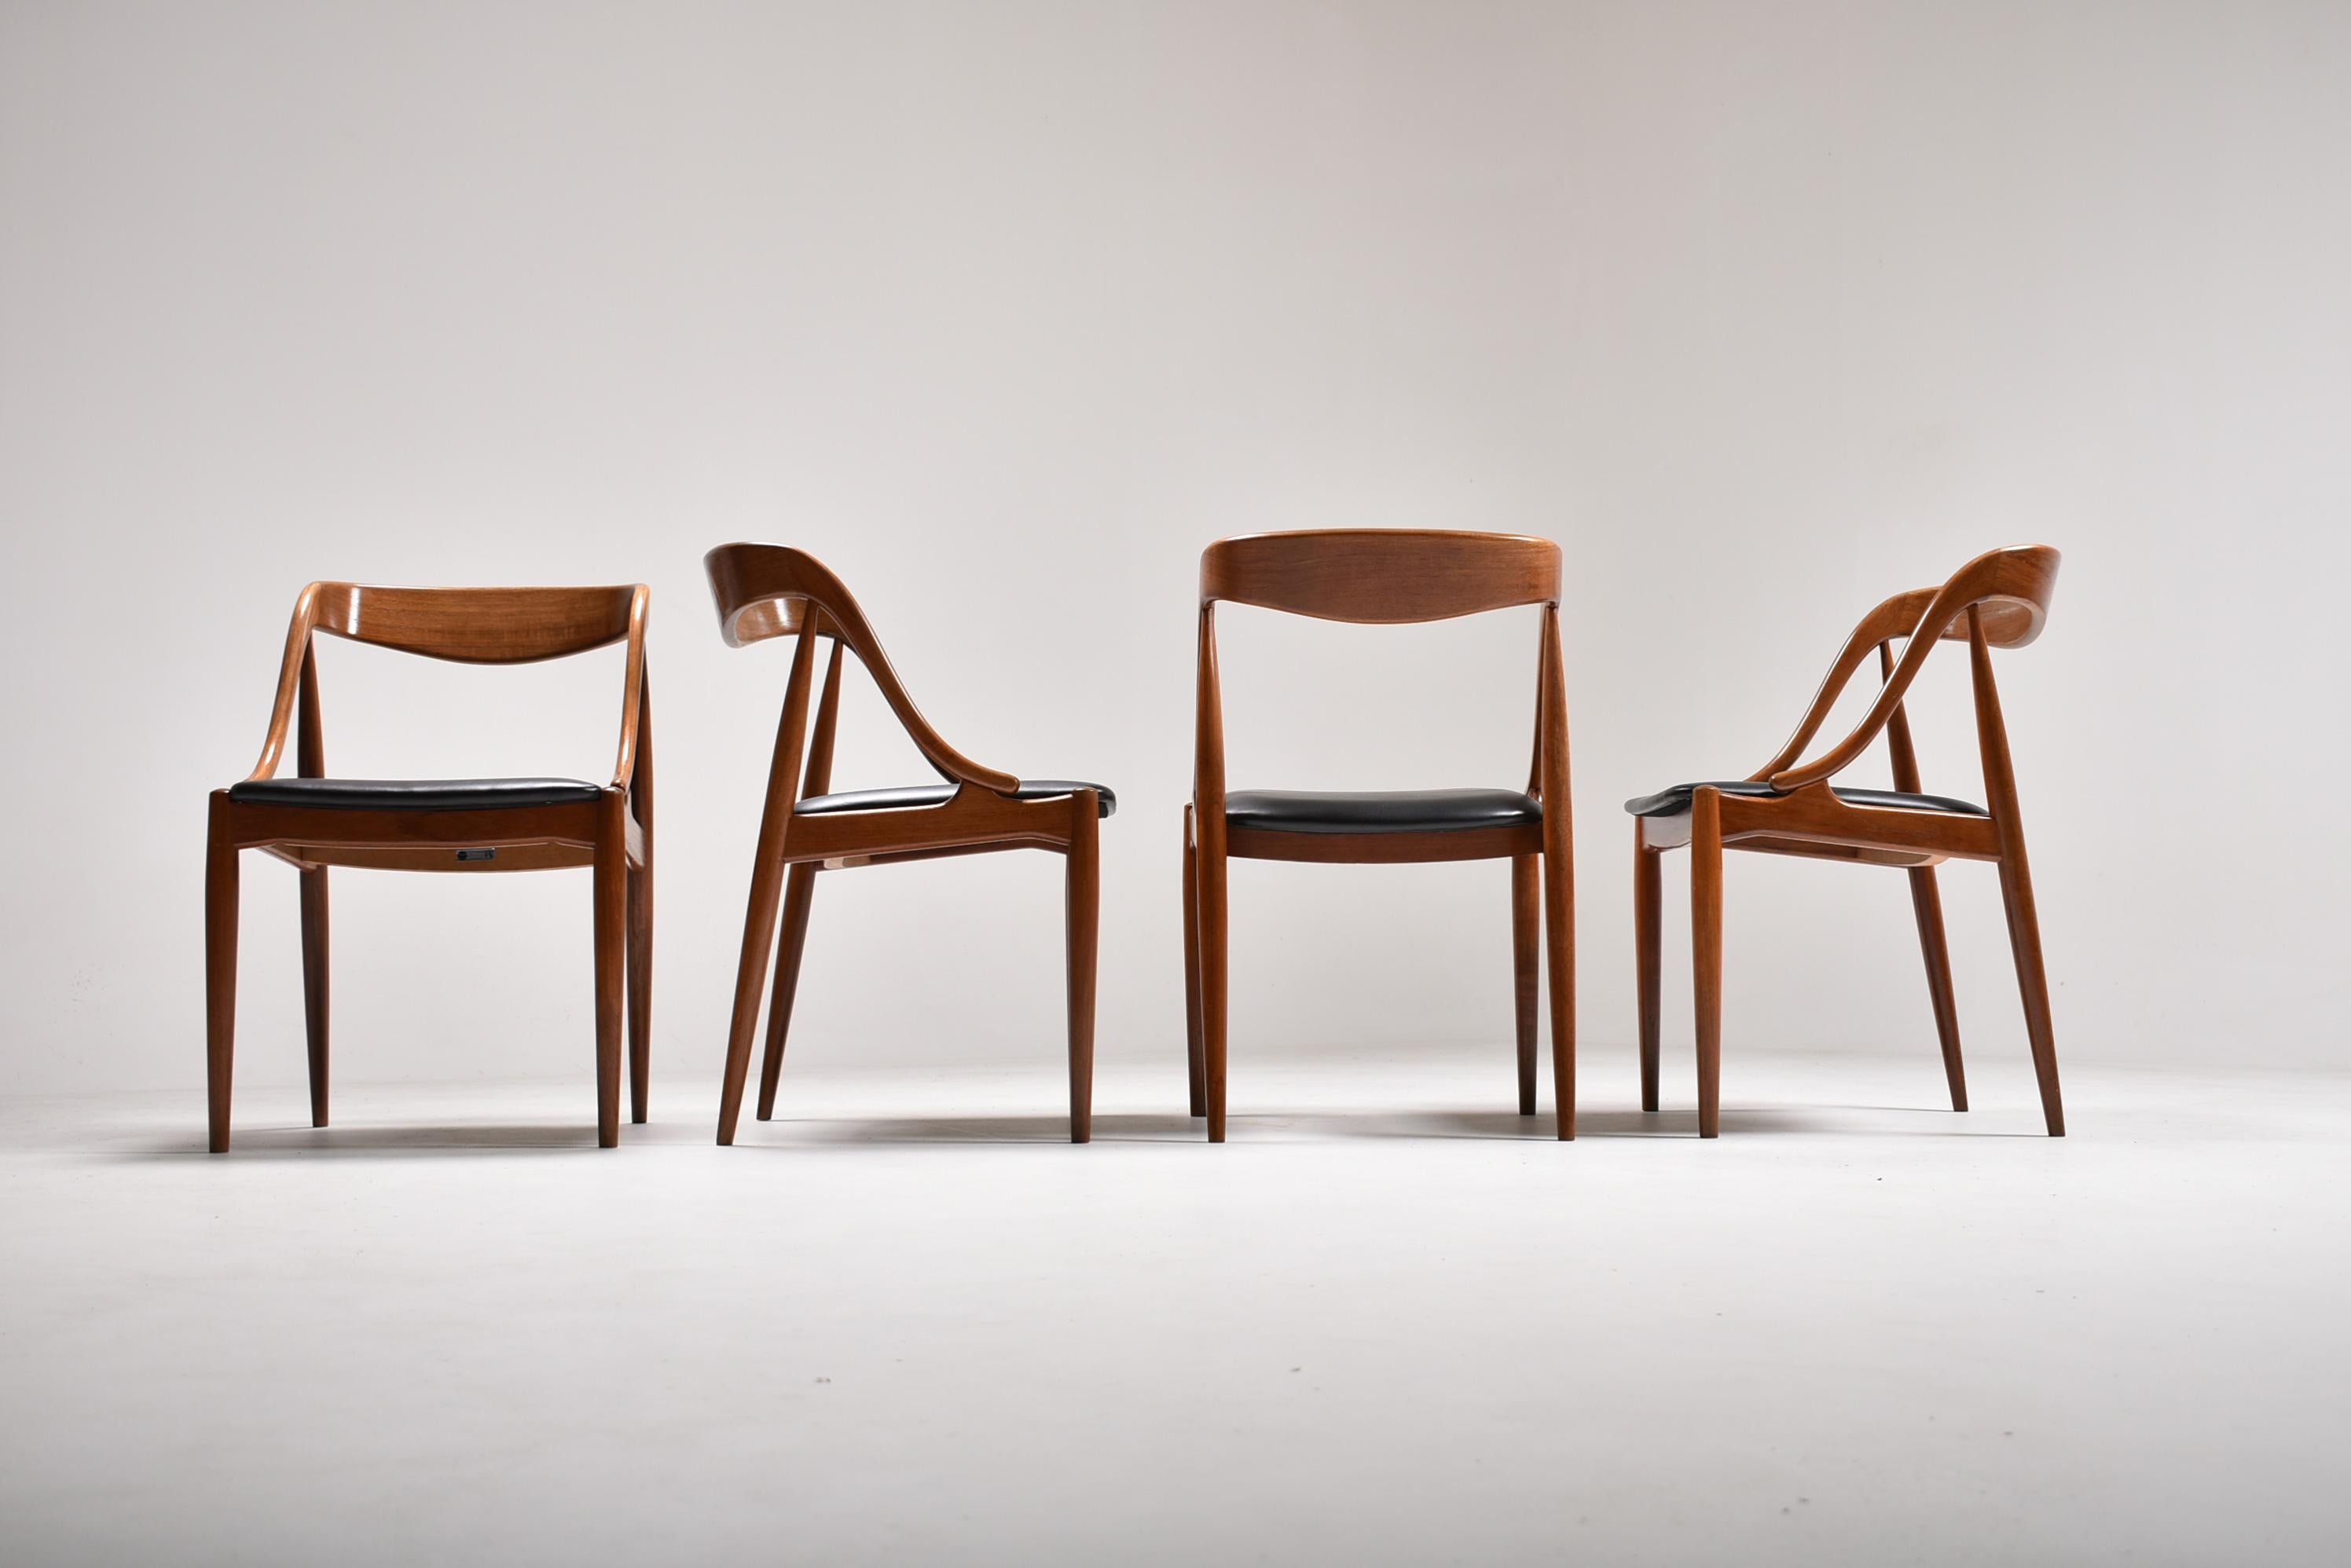 A beautiful, sculptural set of Model 16 teak dining chairs designed by Johannes Andersen for Uldum Møbelfabrik, 1960s.
These elegant chairs have been re-upholstered in high quality black leatherette, and new fabric underside, for a perfect